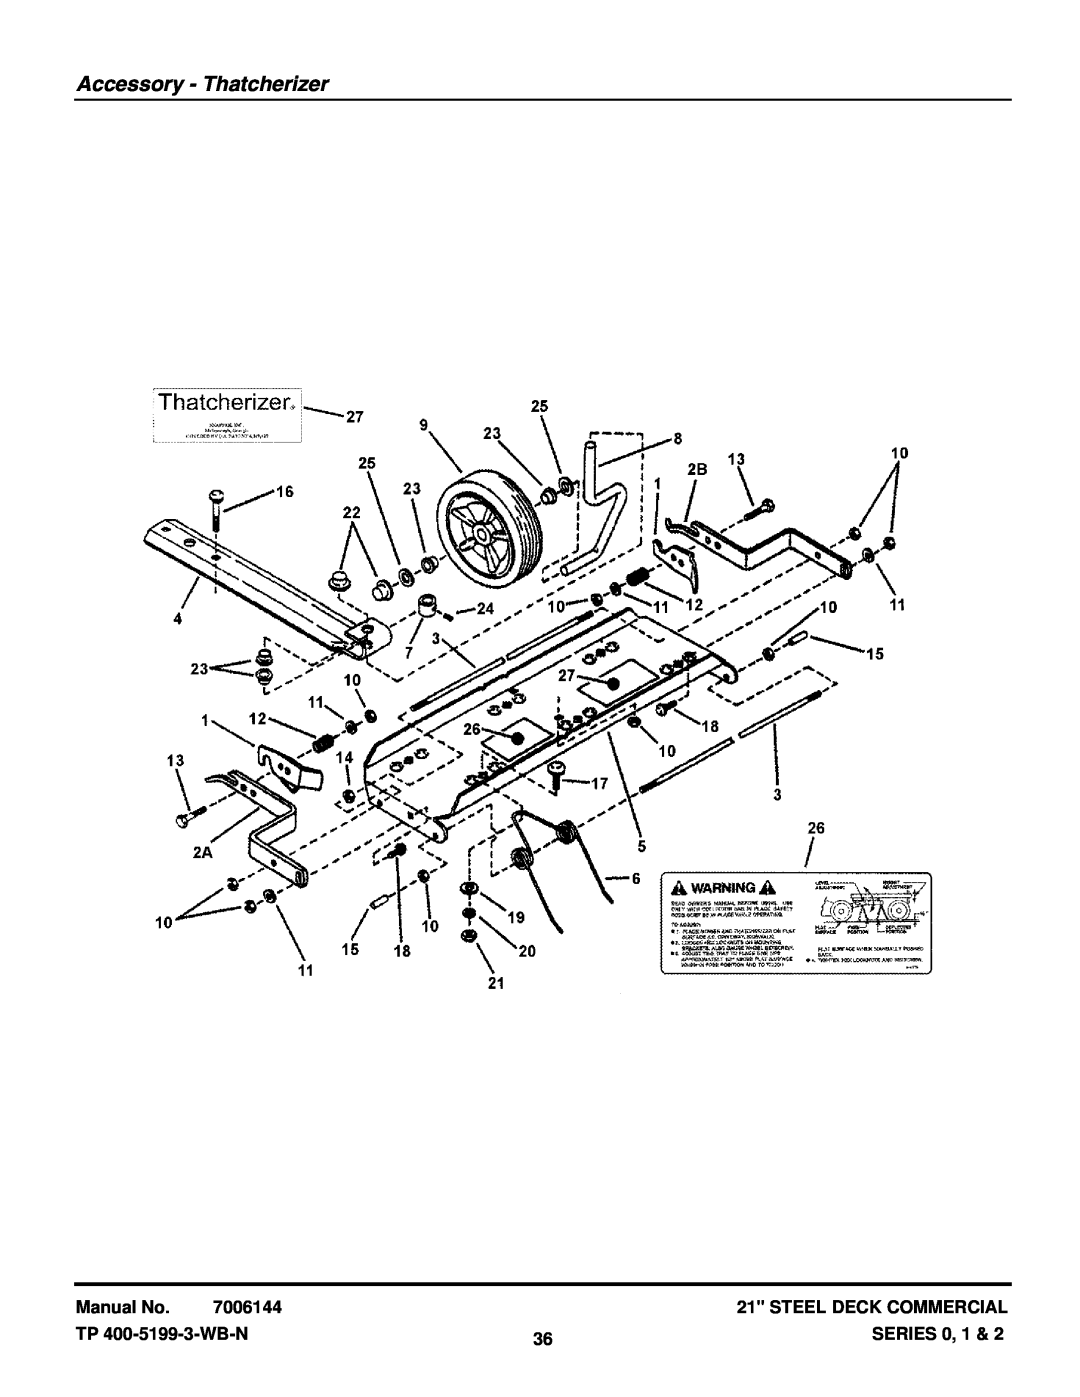 Snapper ECP21550V manual Accessory - Thatcherizer, Manual No, 7006144, Steel Deck Commercial, TP 400-5199-3-WB-N, SERIES 0 